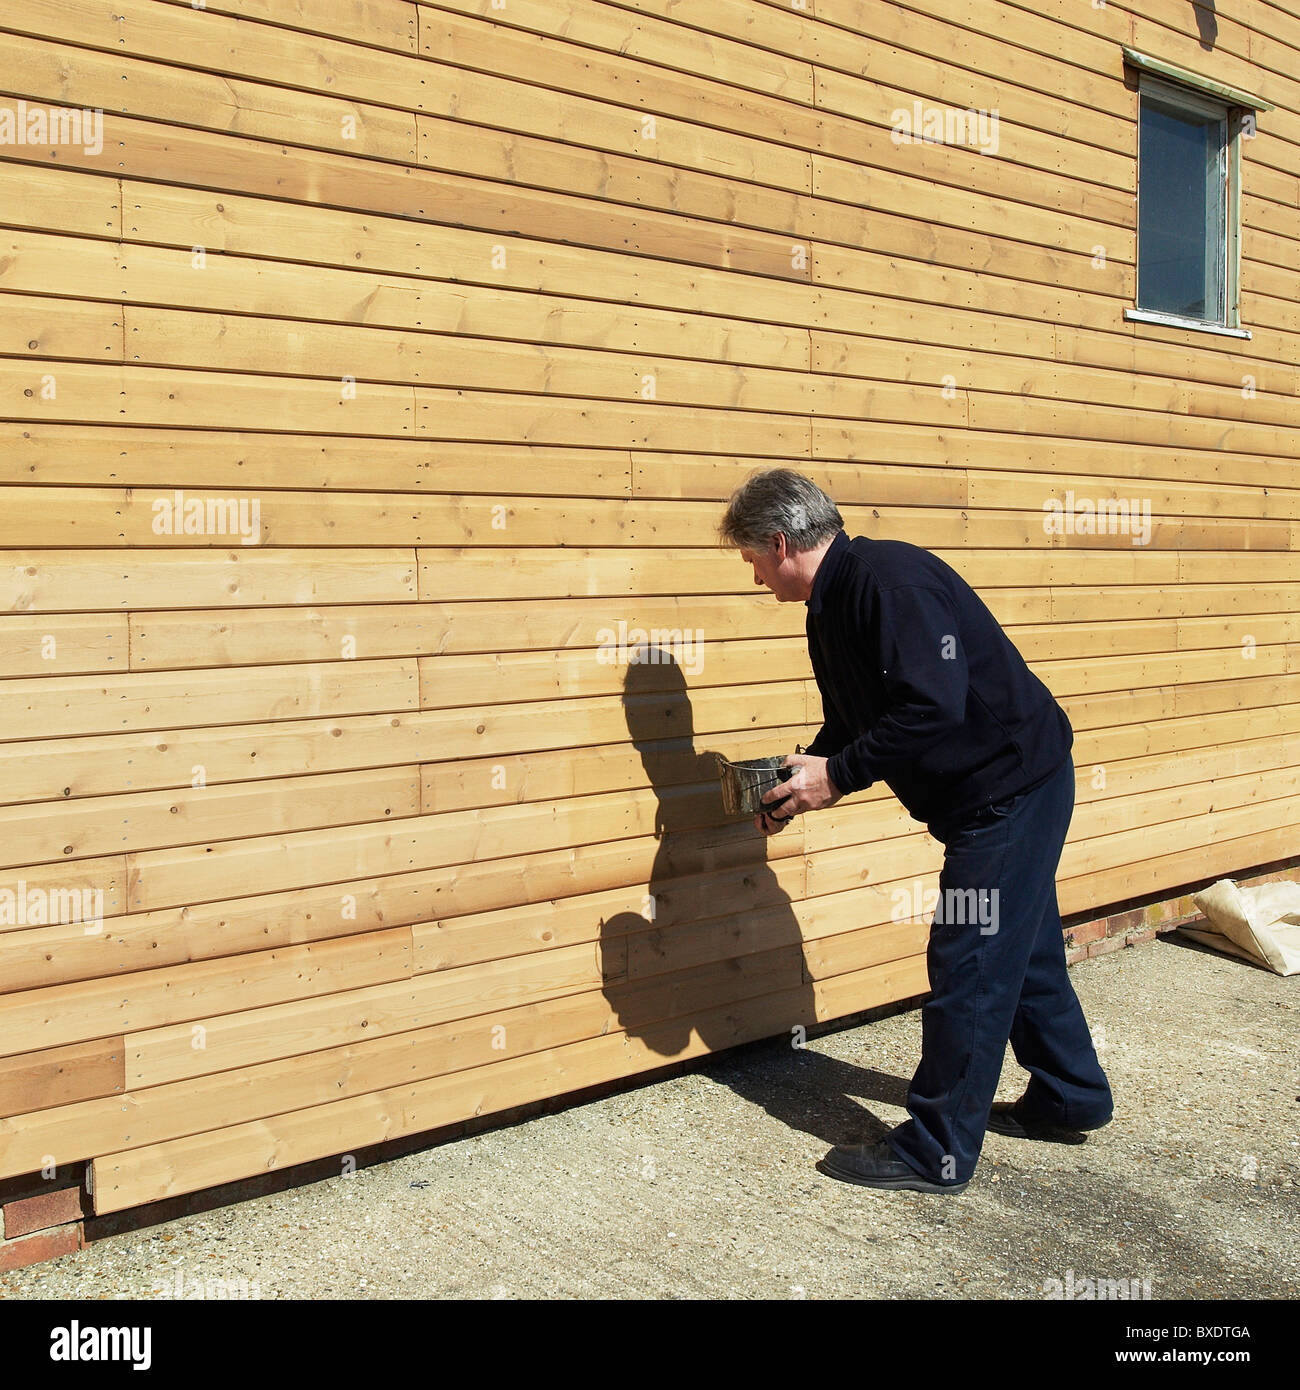 Wood staining weatherboarding on the side of a building Stock Photo